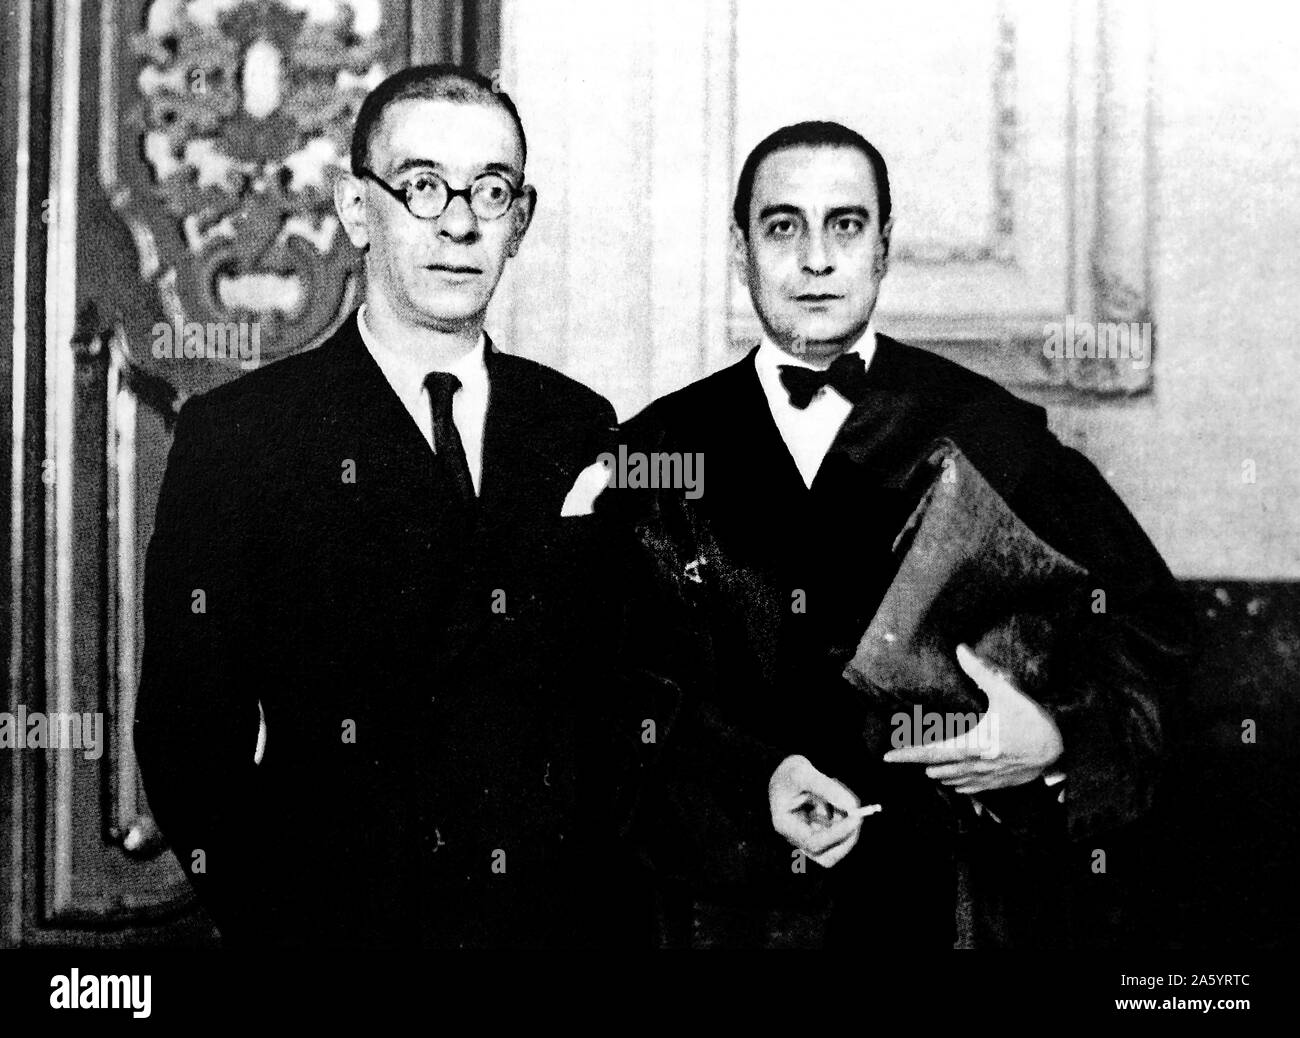 Julian Zuga Mendieta (Left) and (Right) Luis Jiménez de Asúa 1936. Luis Jiménez de Asúa (June 19, 1889 in Madrid - November 16, 1970 in Buenos Aires) was a jurist and Spanish politician. He was vice president of the Spanish parliament and representative of that country before the United Nations. During the Francoist dictatorship he exiled himself to Argentina. In 1962 he was named president of the Spanish Republican government in Exile. Stock Photo